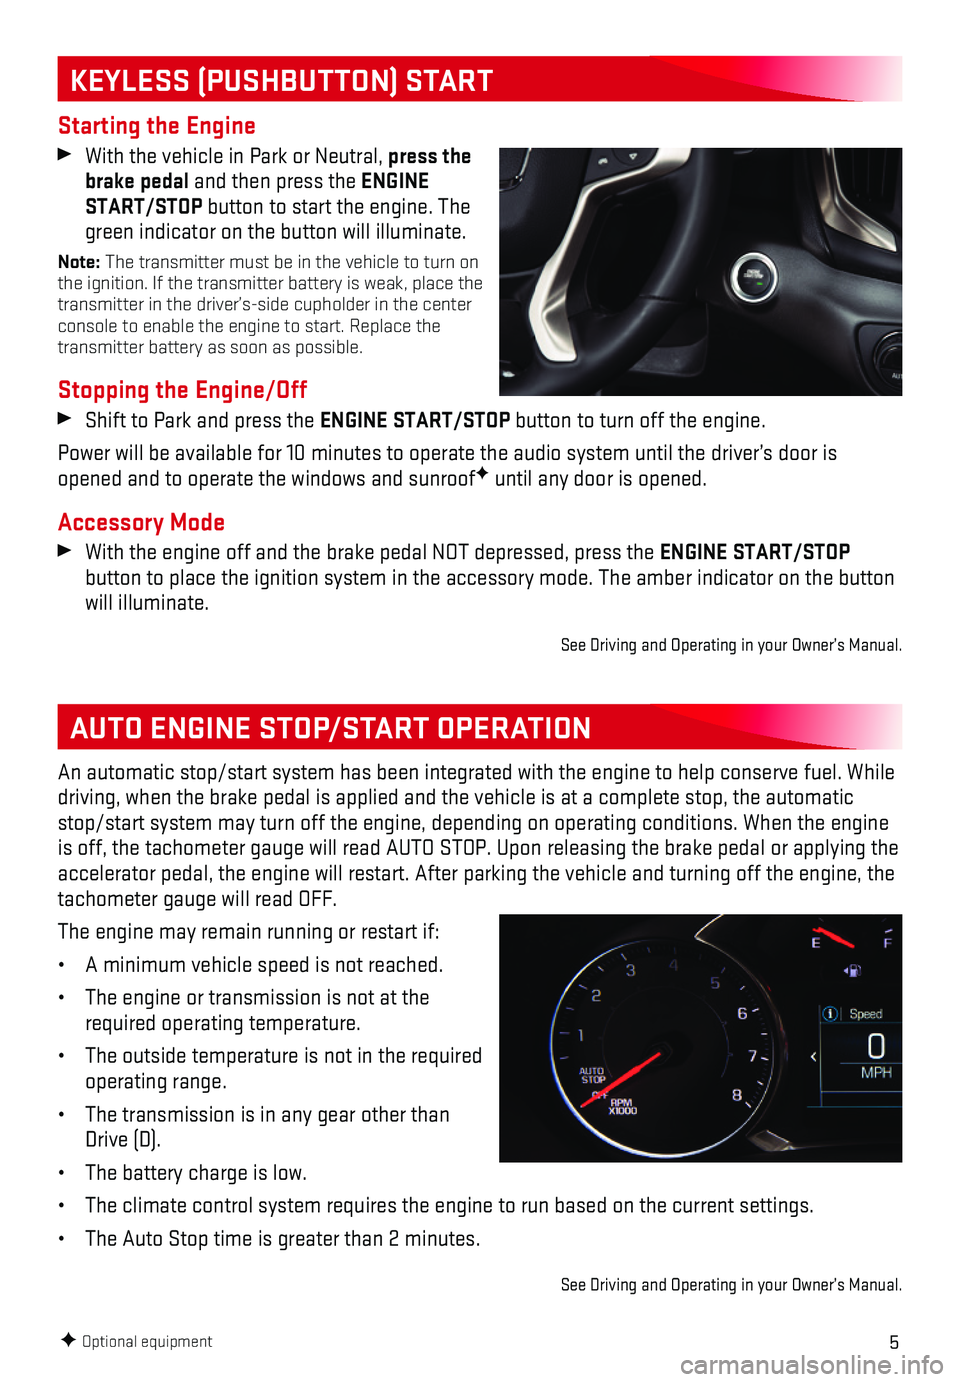 GMC TERRAIN 2018  Get To Know Guide 5
KEYLESS (PUSHBUTTON) START
AUTO ENGINE STOP/START OPERATION
F Optional equipment
Starting the Engine
 With the vehicle in Park or Neutral, press the brake pedal and then press the ENGINE START/STOP 